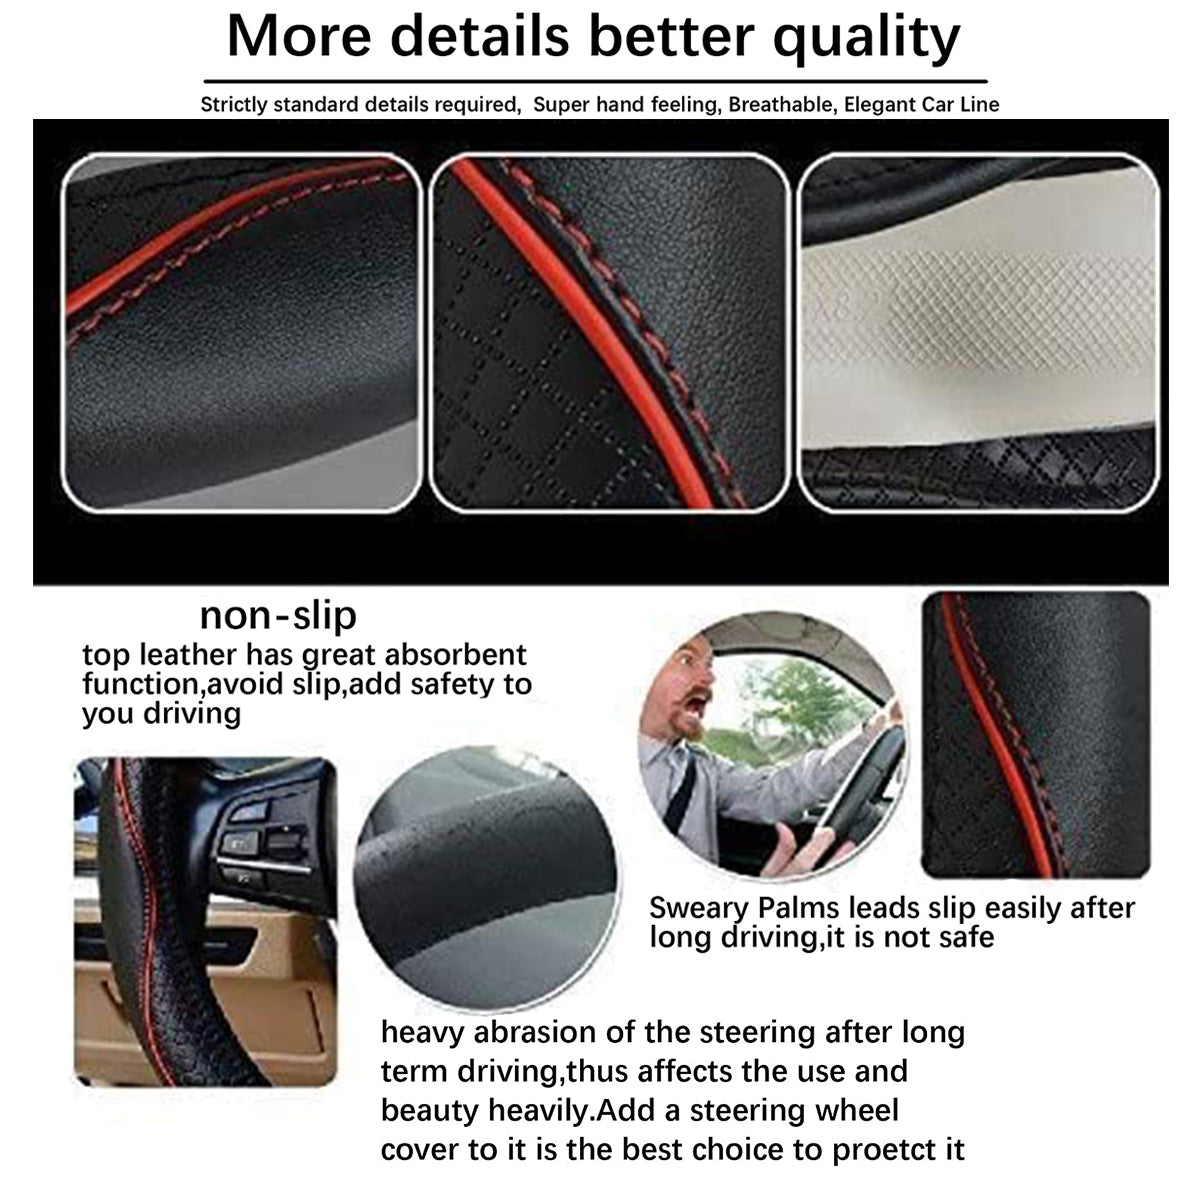 Car Steering Wheel Cover, Custom For Your Cars, Anti-Slip, Safety, Soft, Breathable, Heavy Duty, Thick, Full Surround, Sports Style, Car Accessories SU18990